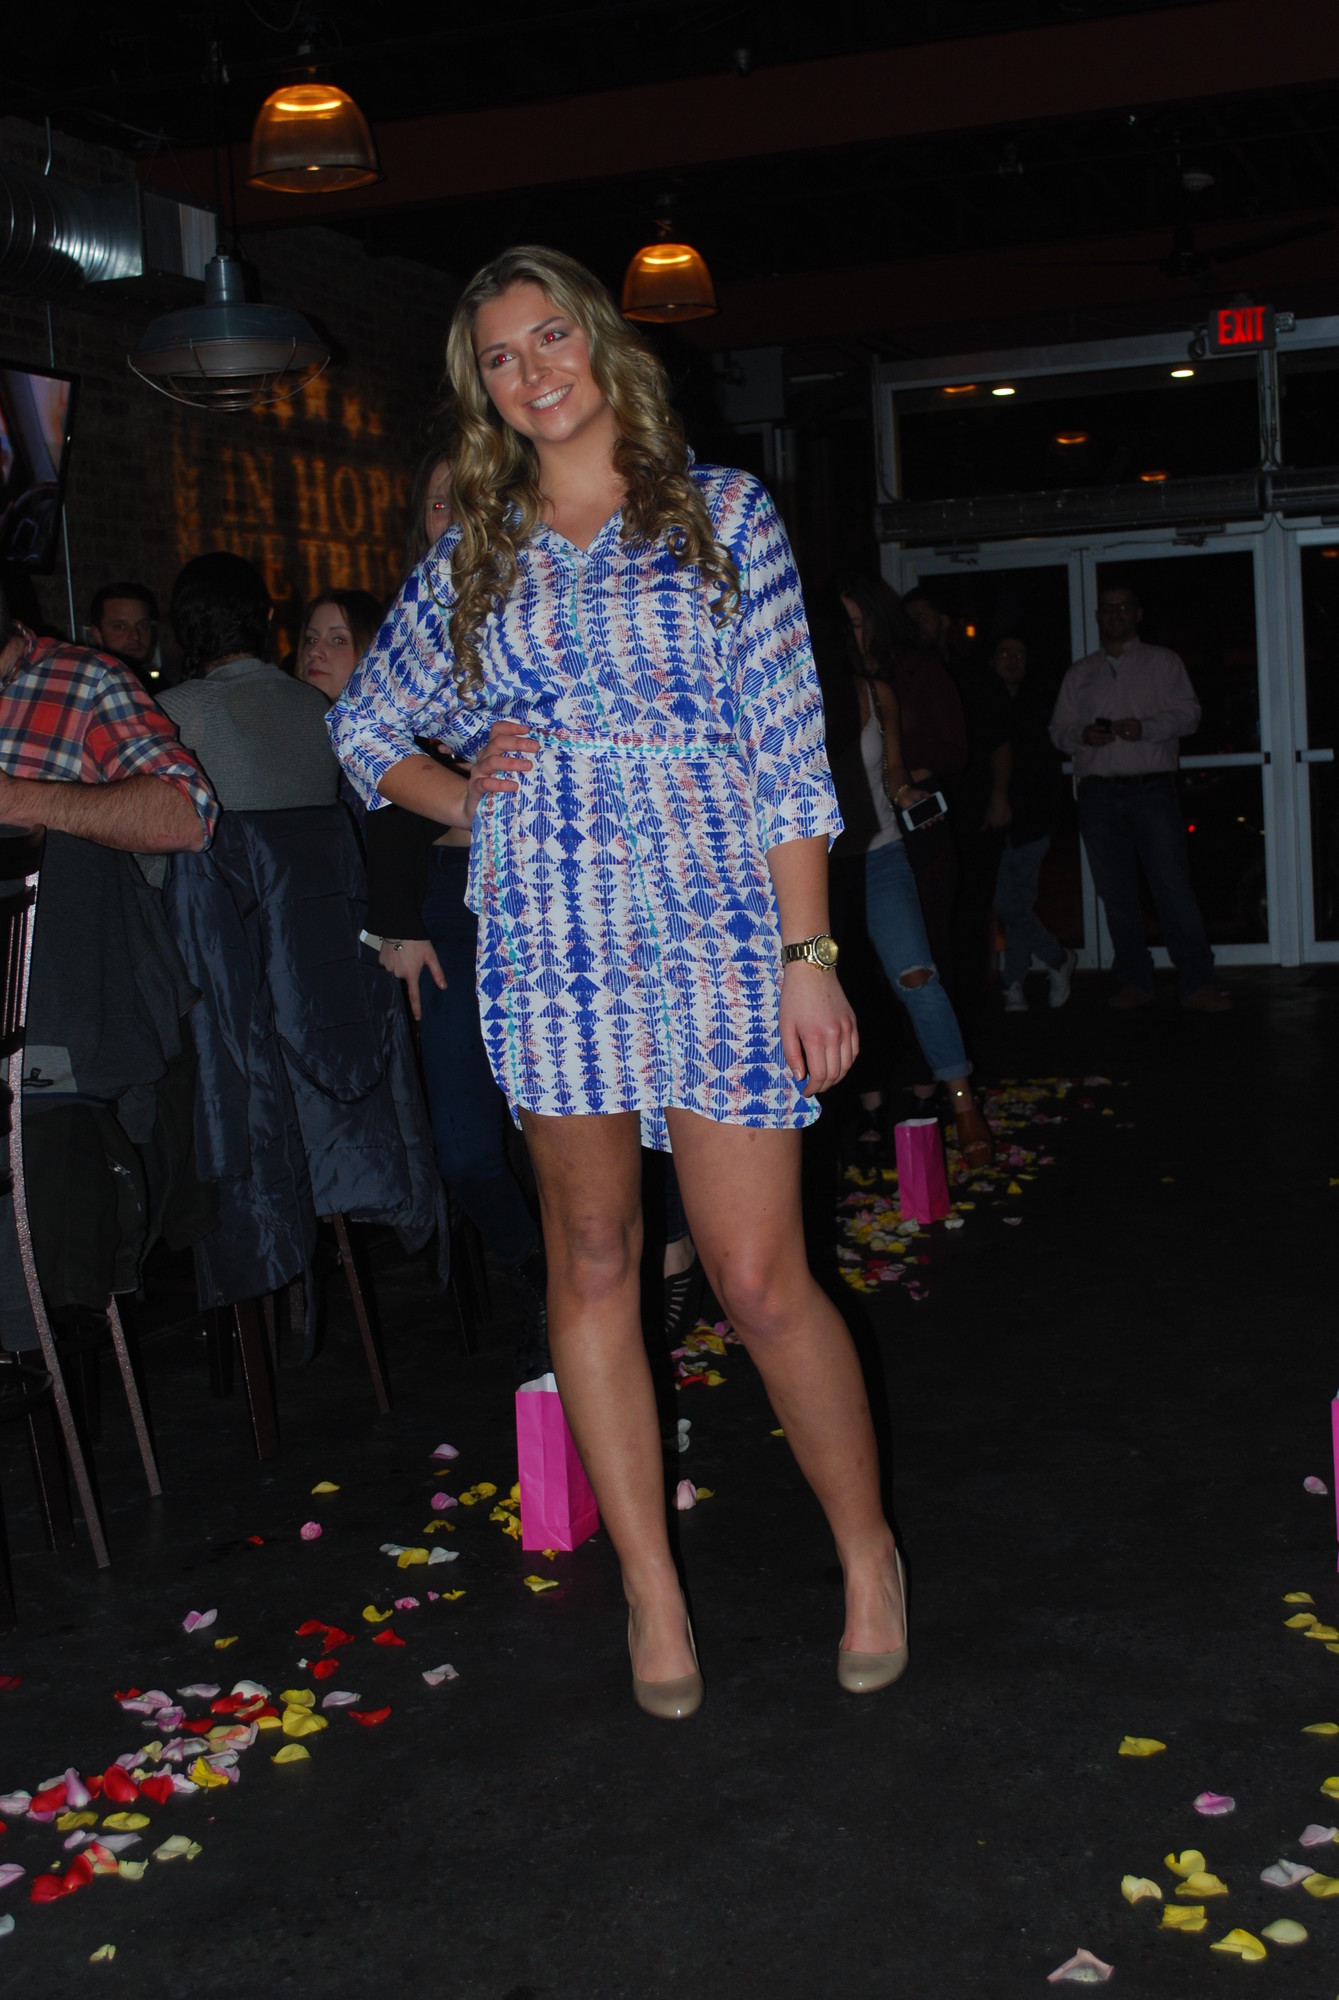 Courtney Anderson walked the runway modeling off fun styles for spring.